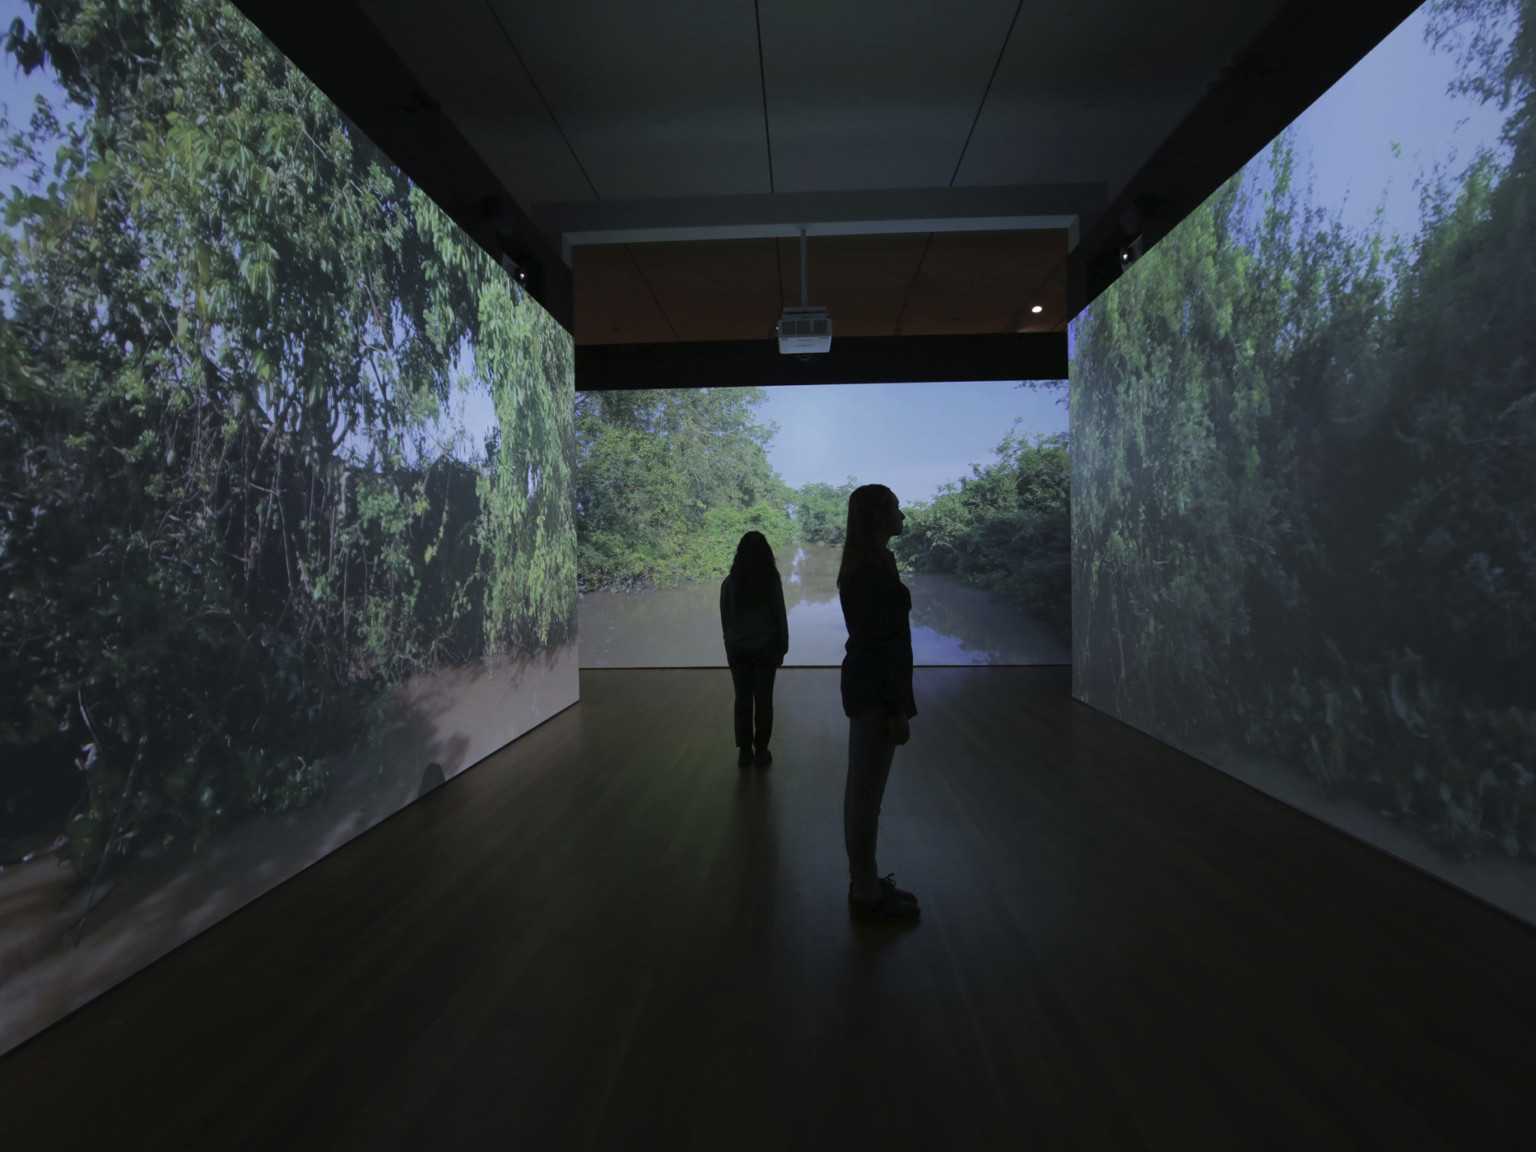 two darkened silhouettes stand apart in a dark room with three walls illuminated by projected images of a muddy river